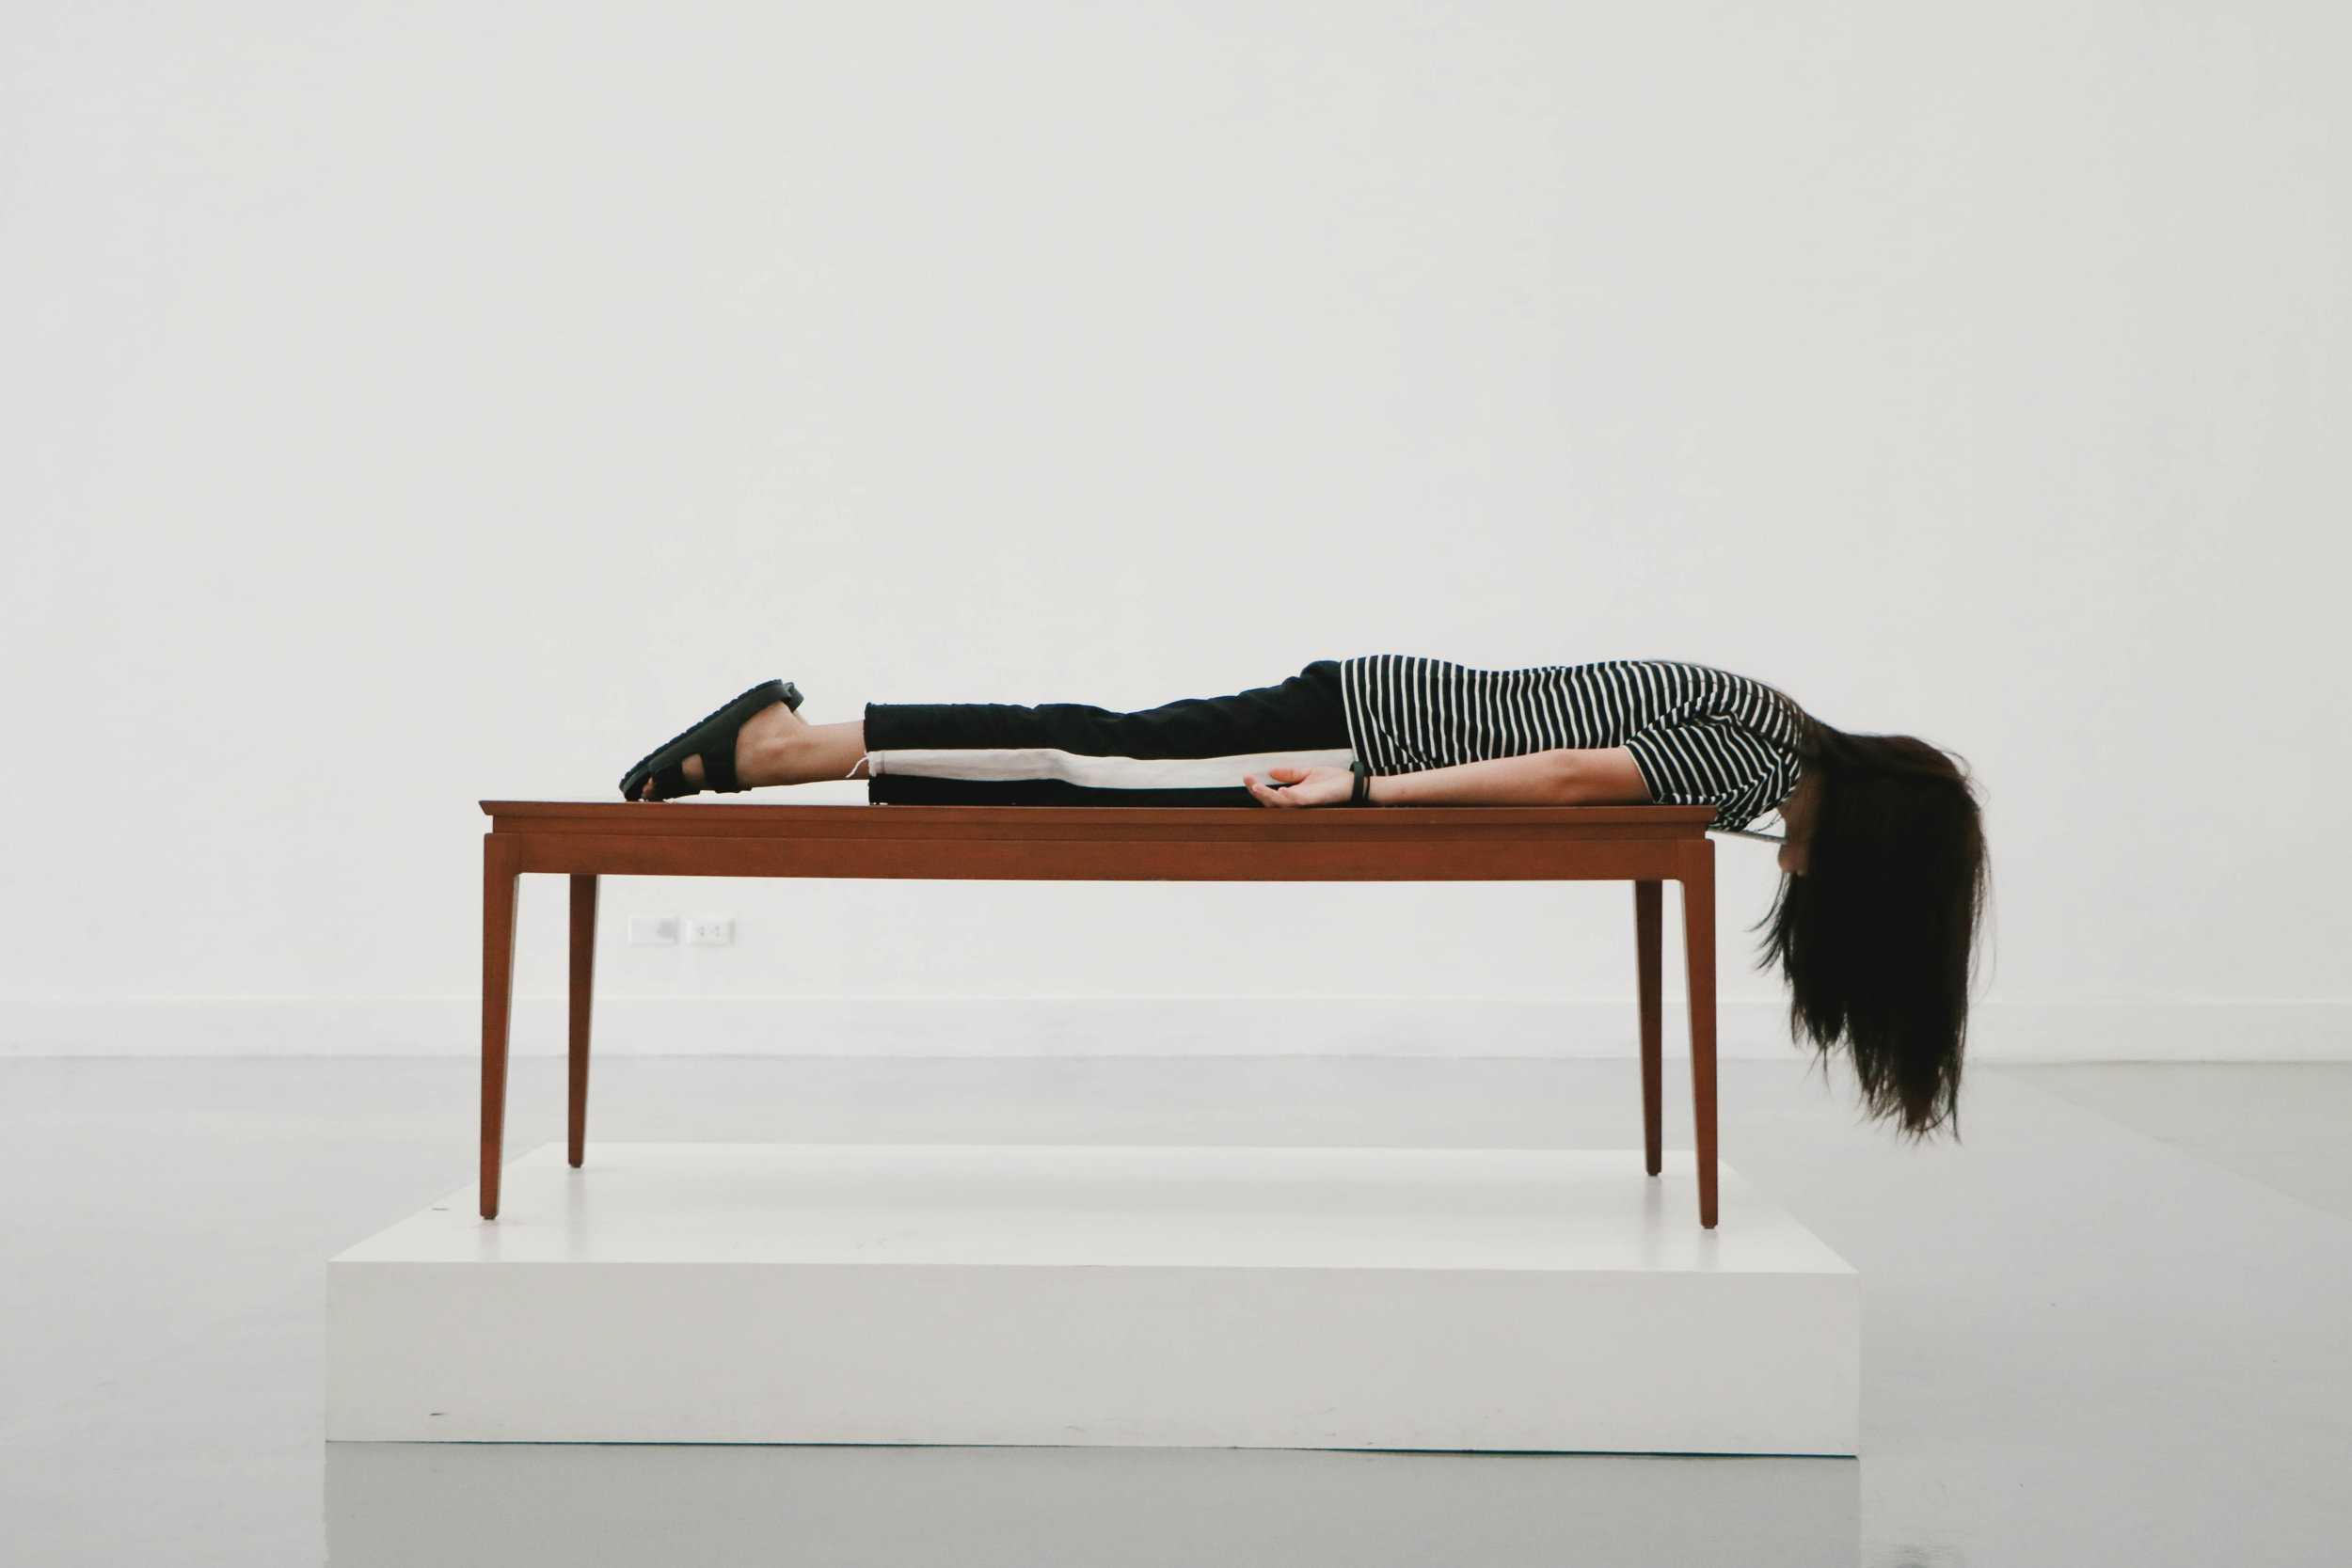 Person lying face down on a table